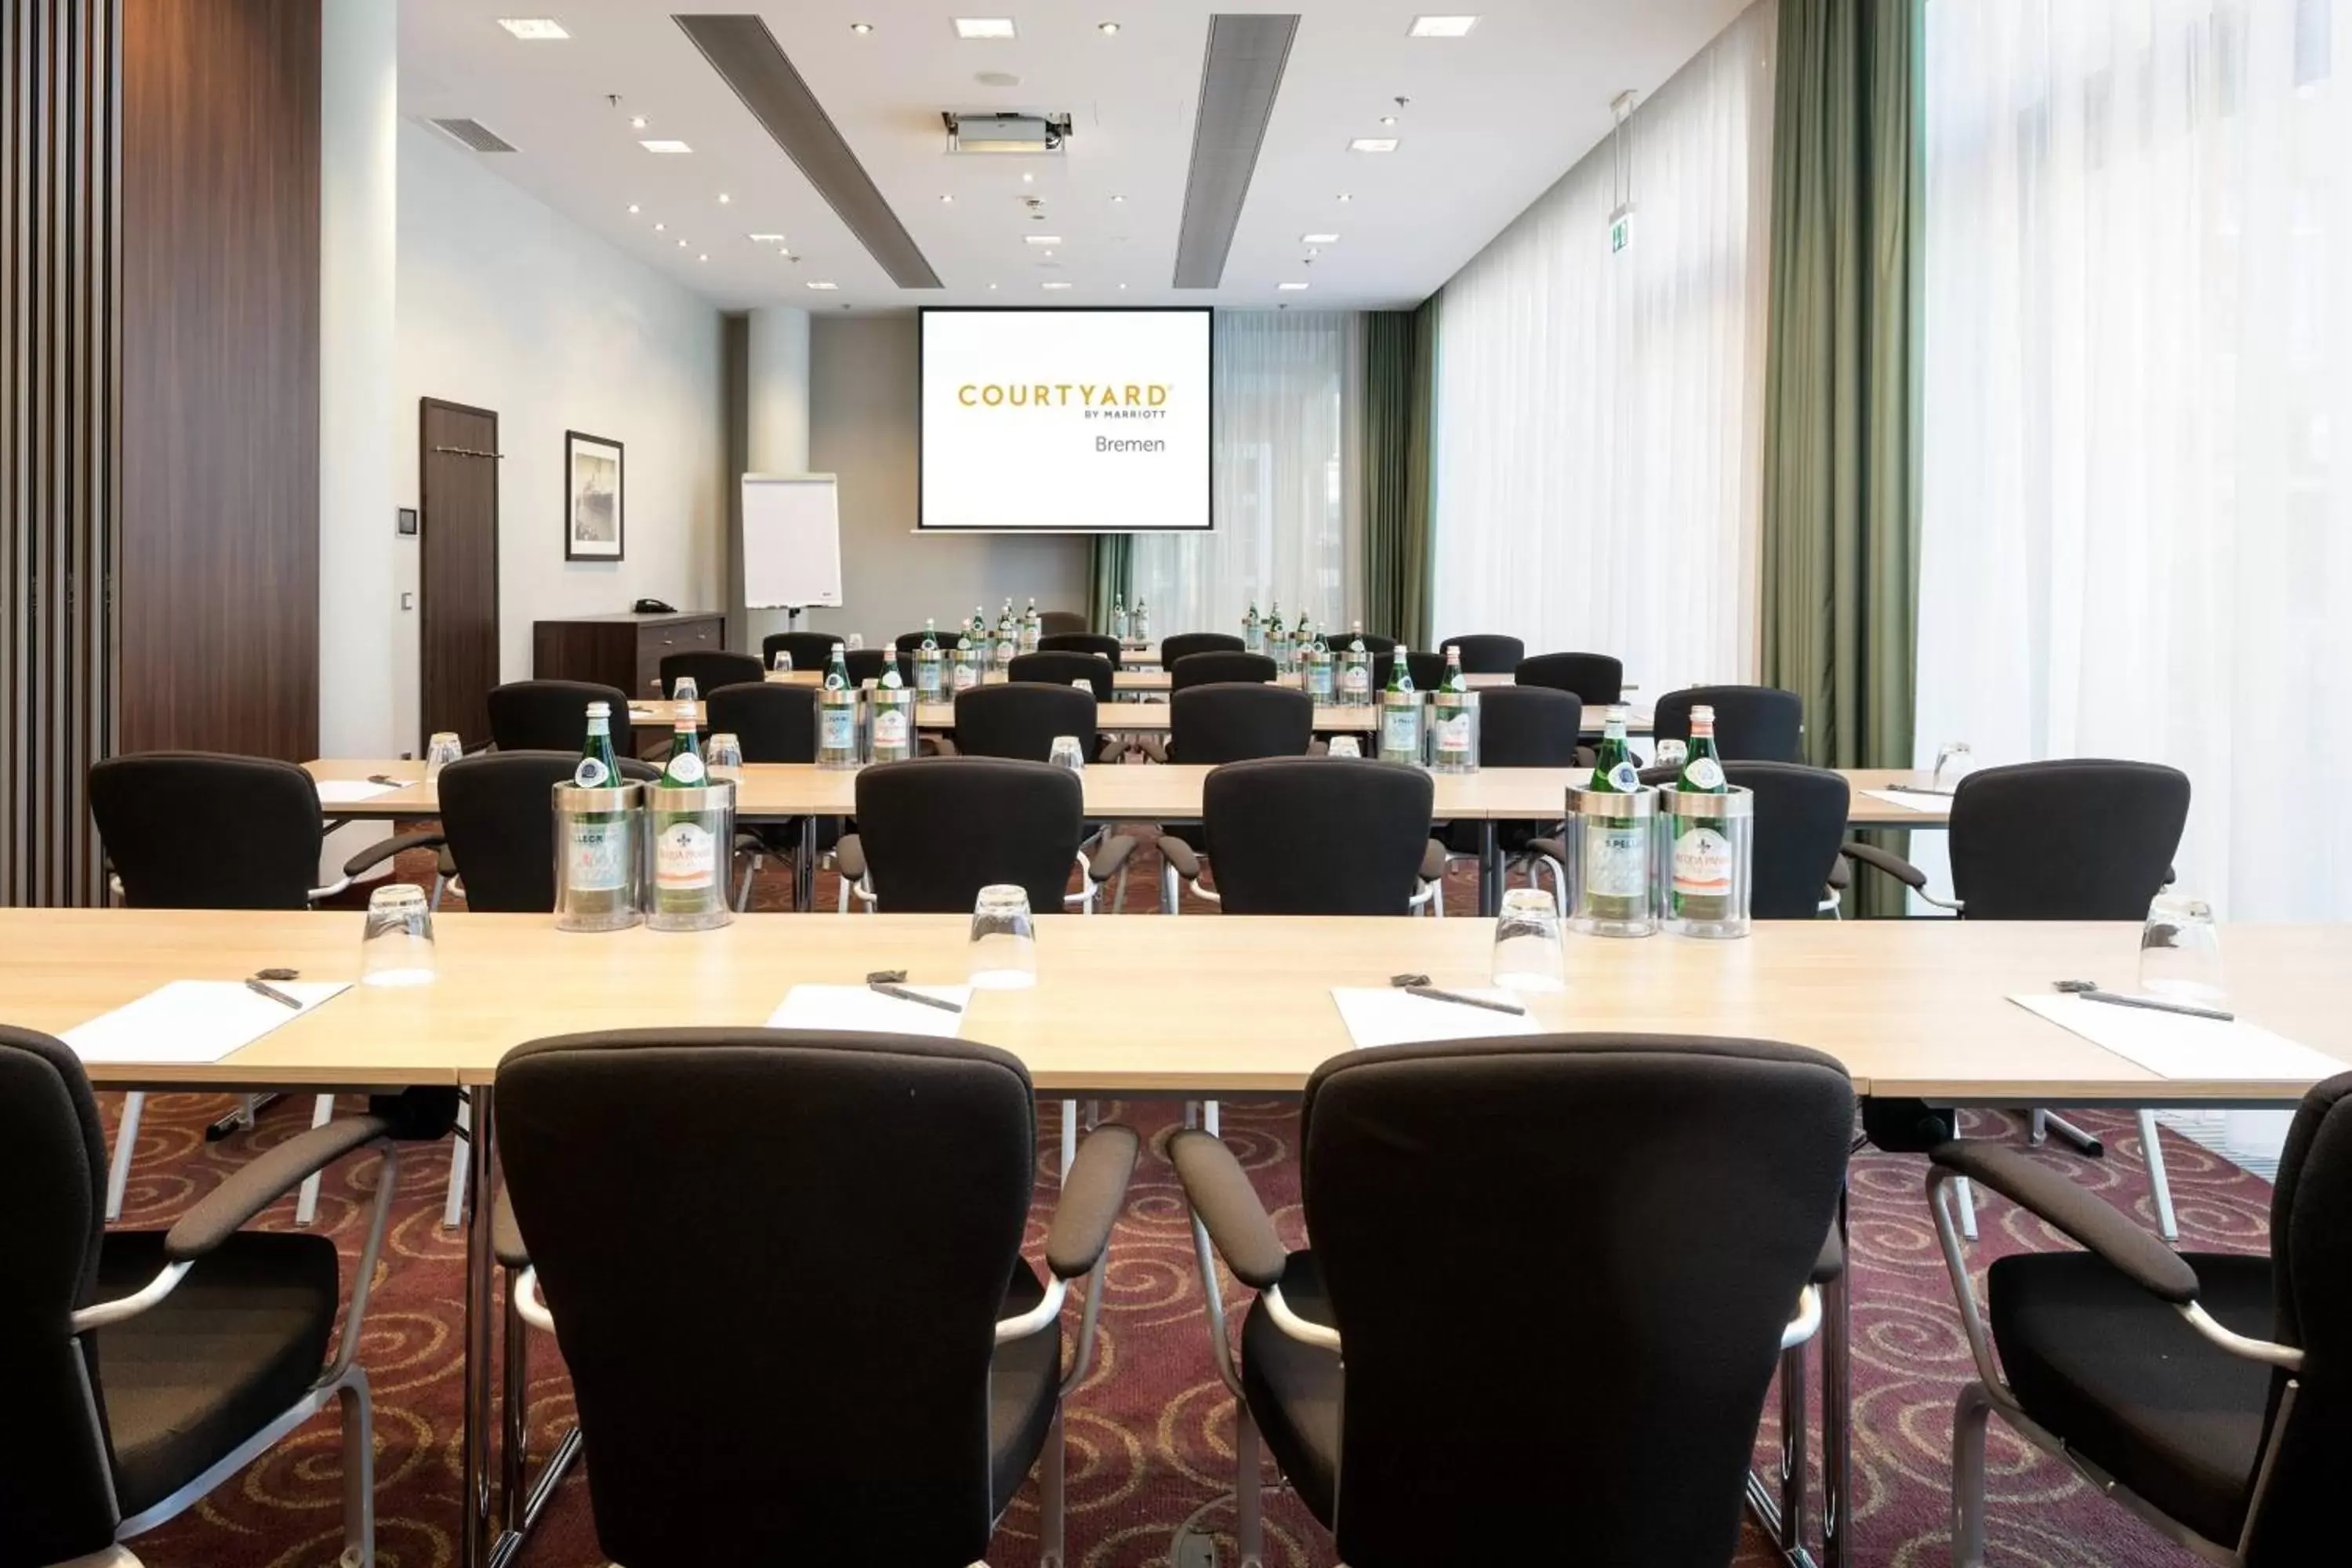 Meeting/conference room in Courtyard by Marriott Bremen